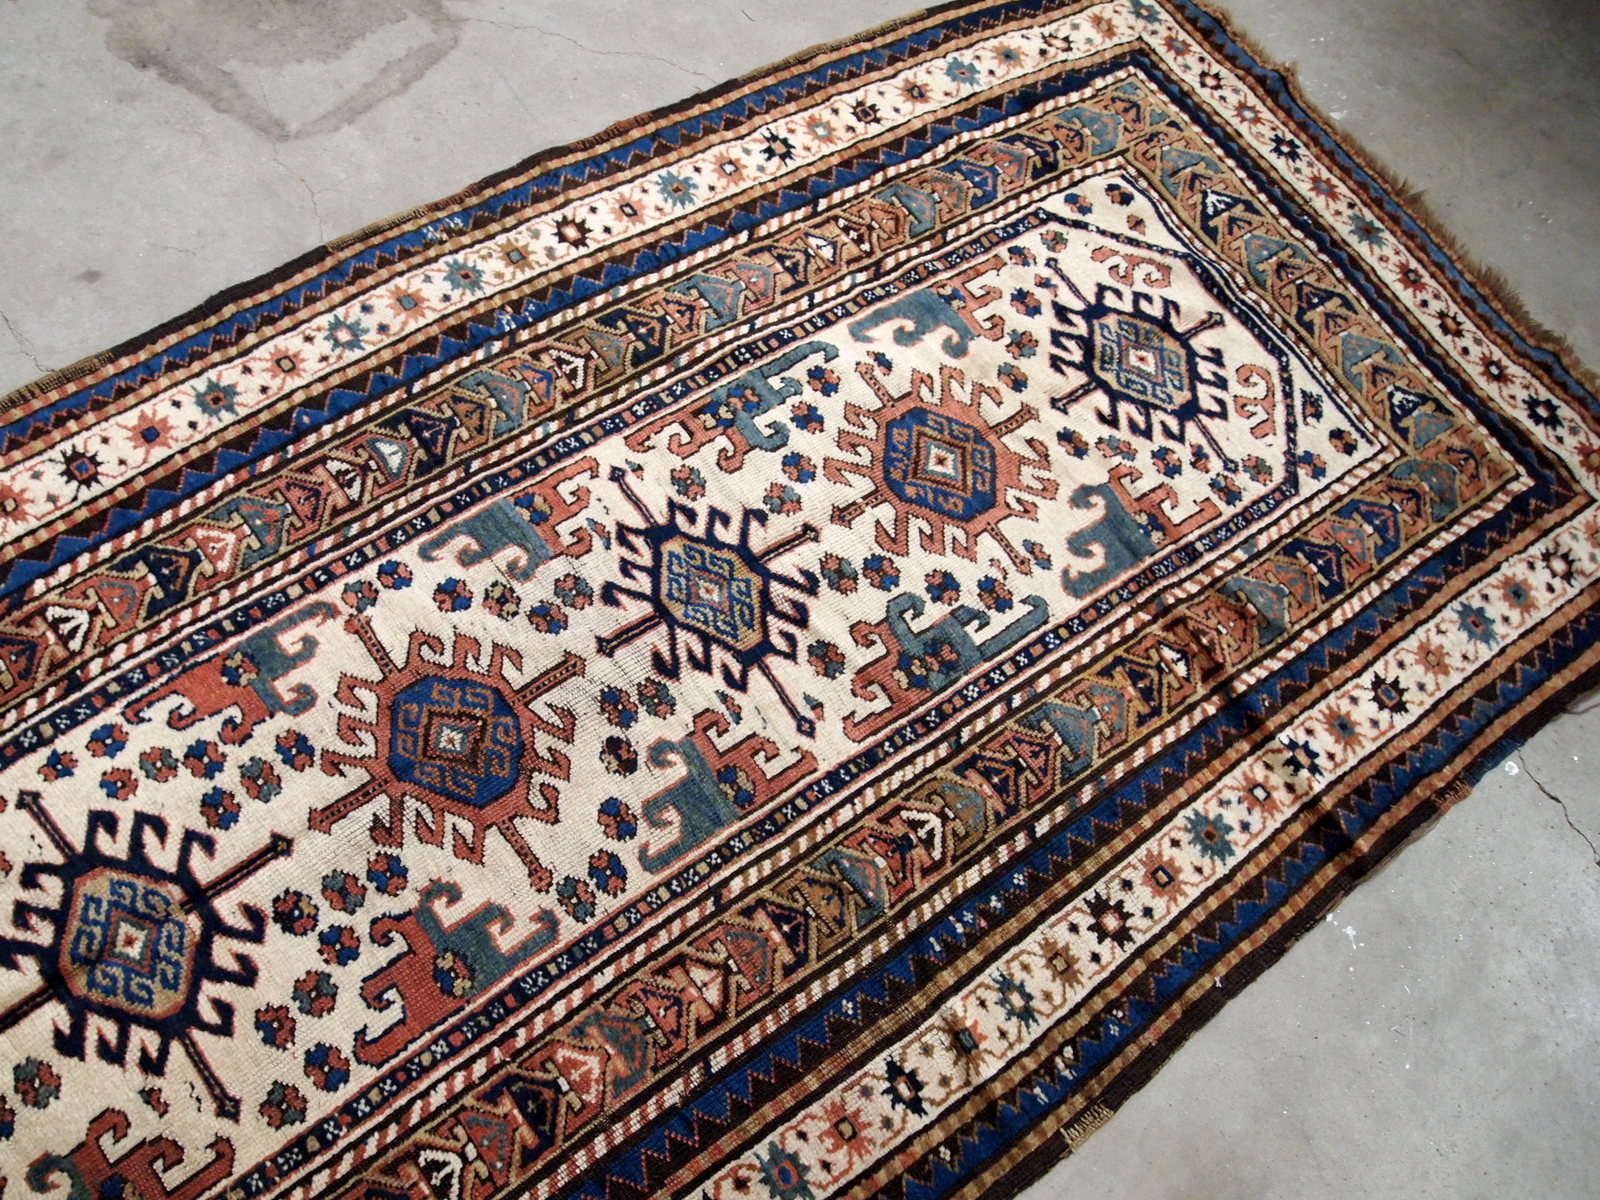 Handmade antique Caucasian Kazak rug in kele size. The rug is from the end of 19th century in original good condition.